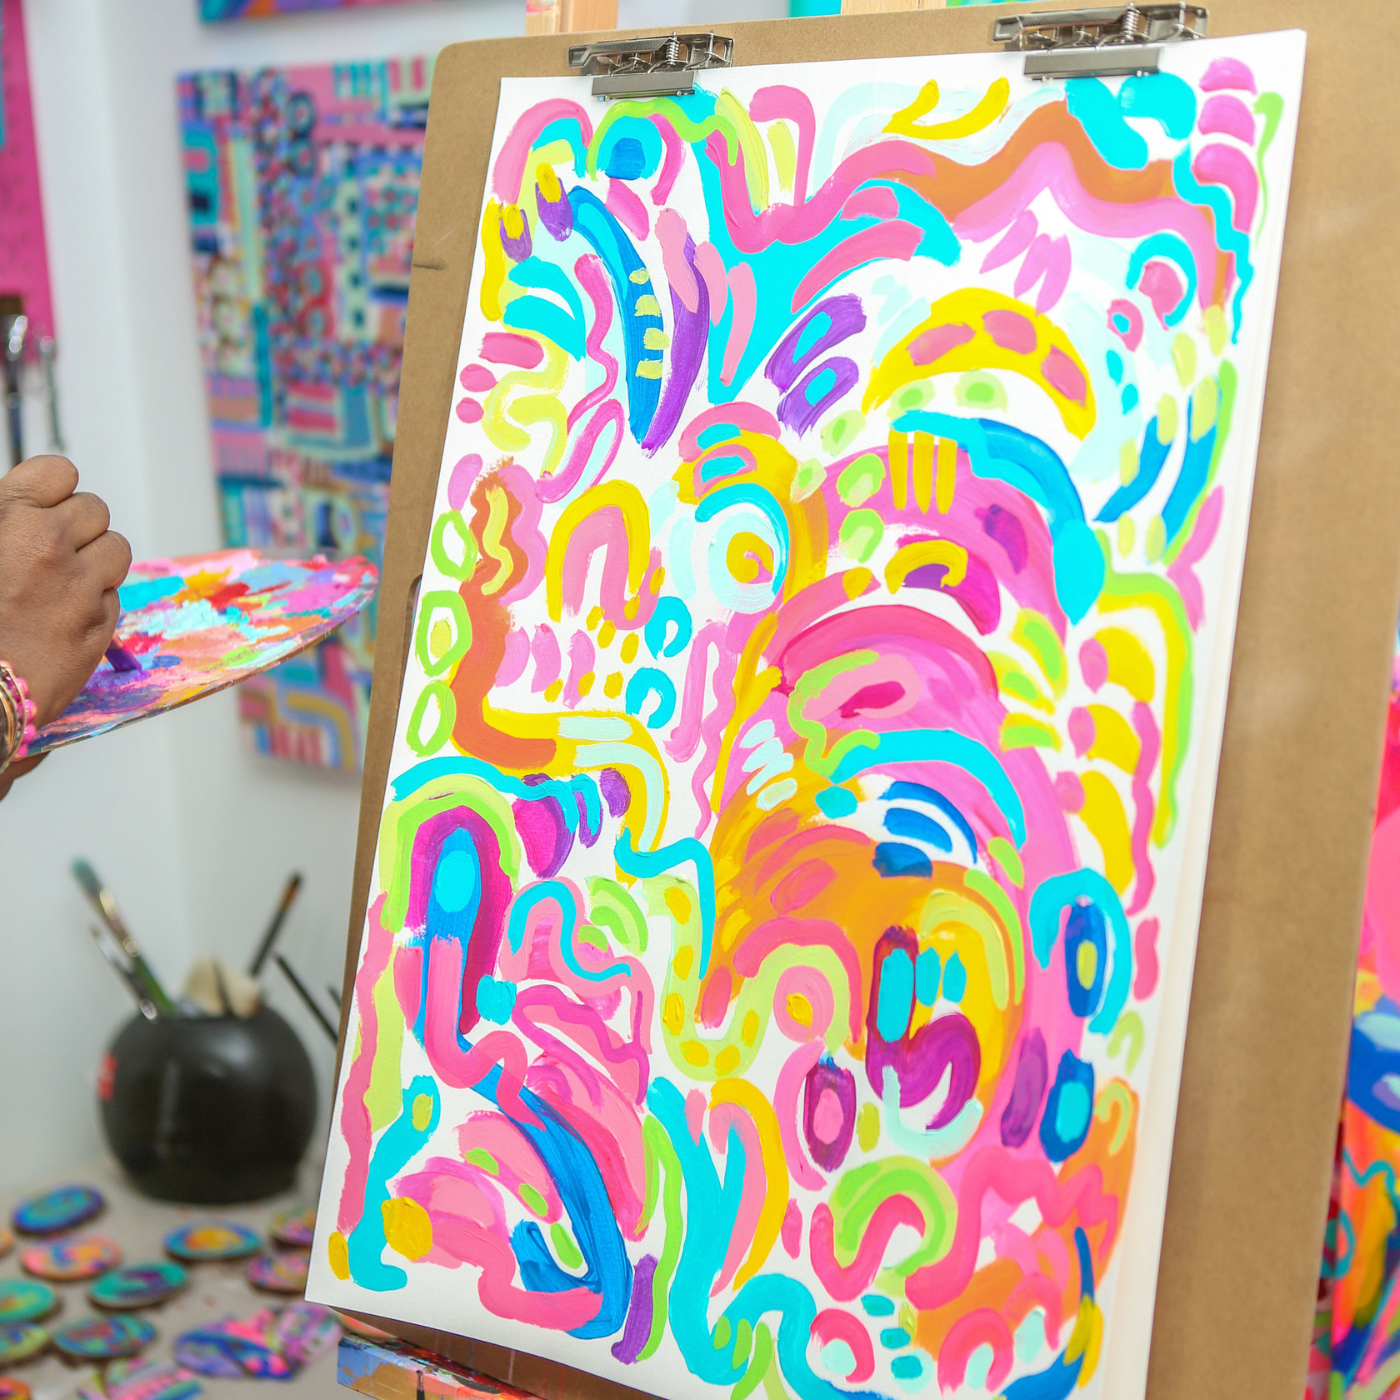 A hand partially shown in the middle lefthand side of the photo dips a paintbrush in a bit of purple paint on a full color palette. A piece of paper on an easel to the right is full of geometric squiggles in hot pink, light pink, orange, turquoise, dark blue and more. A similar painting is on the wall to the left of the easel. Small round colorful paintings are on the ground to the left.